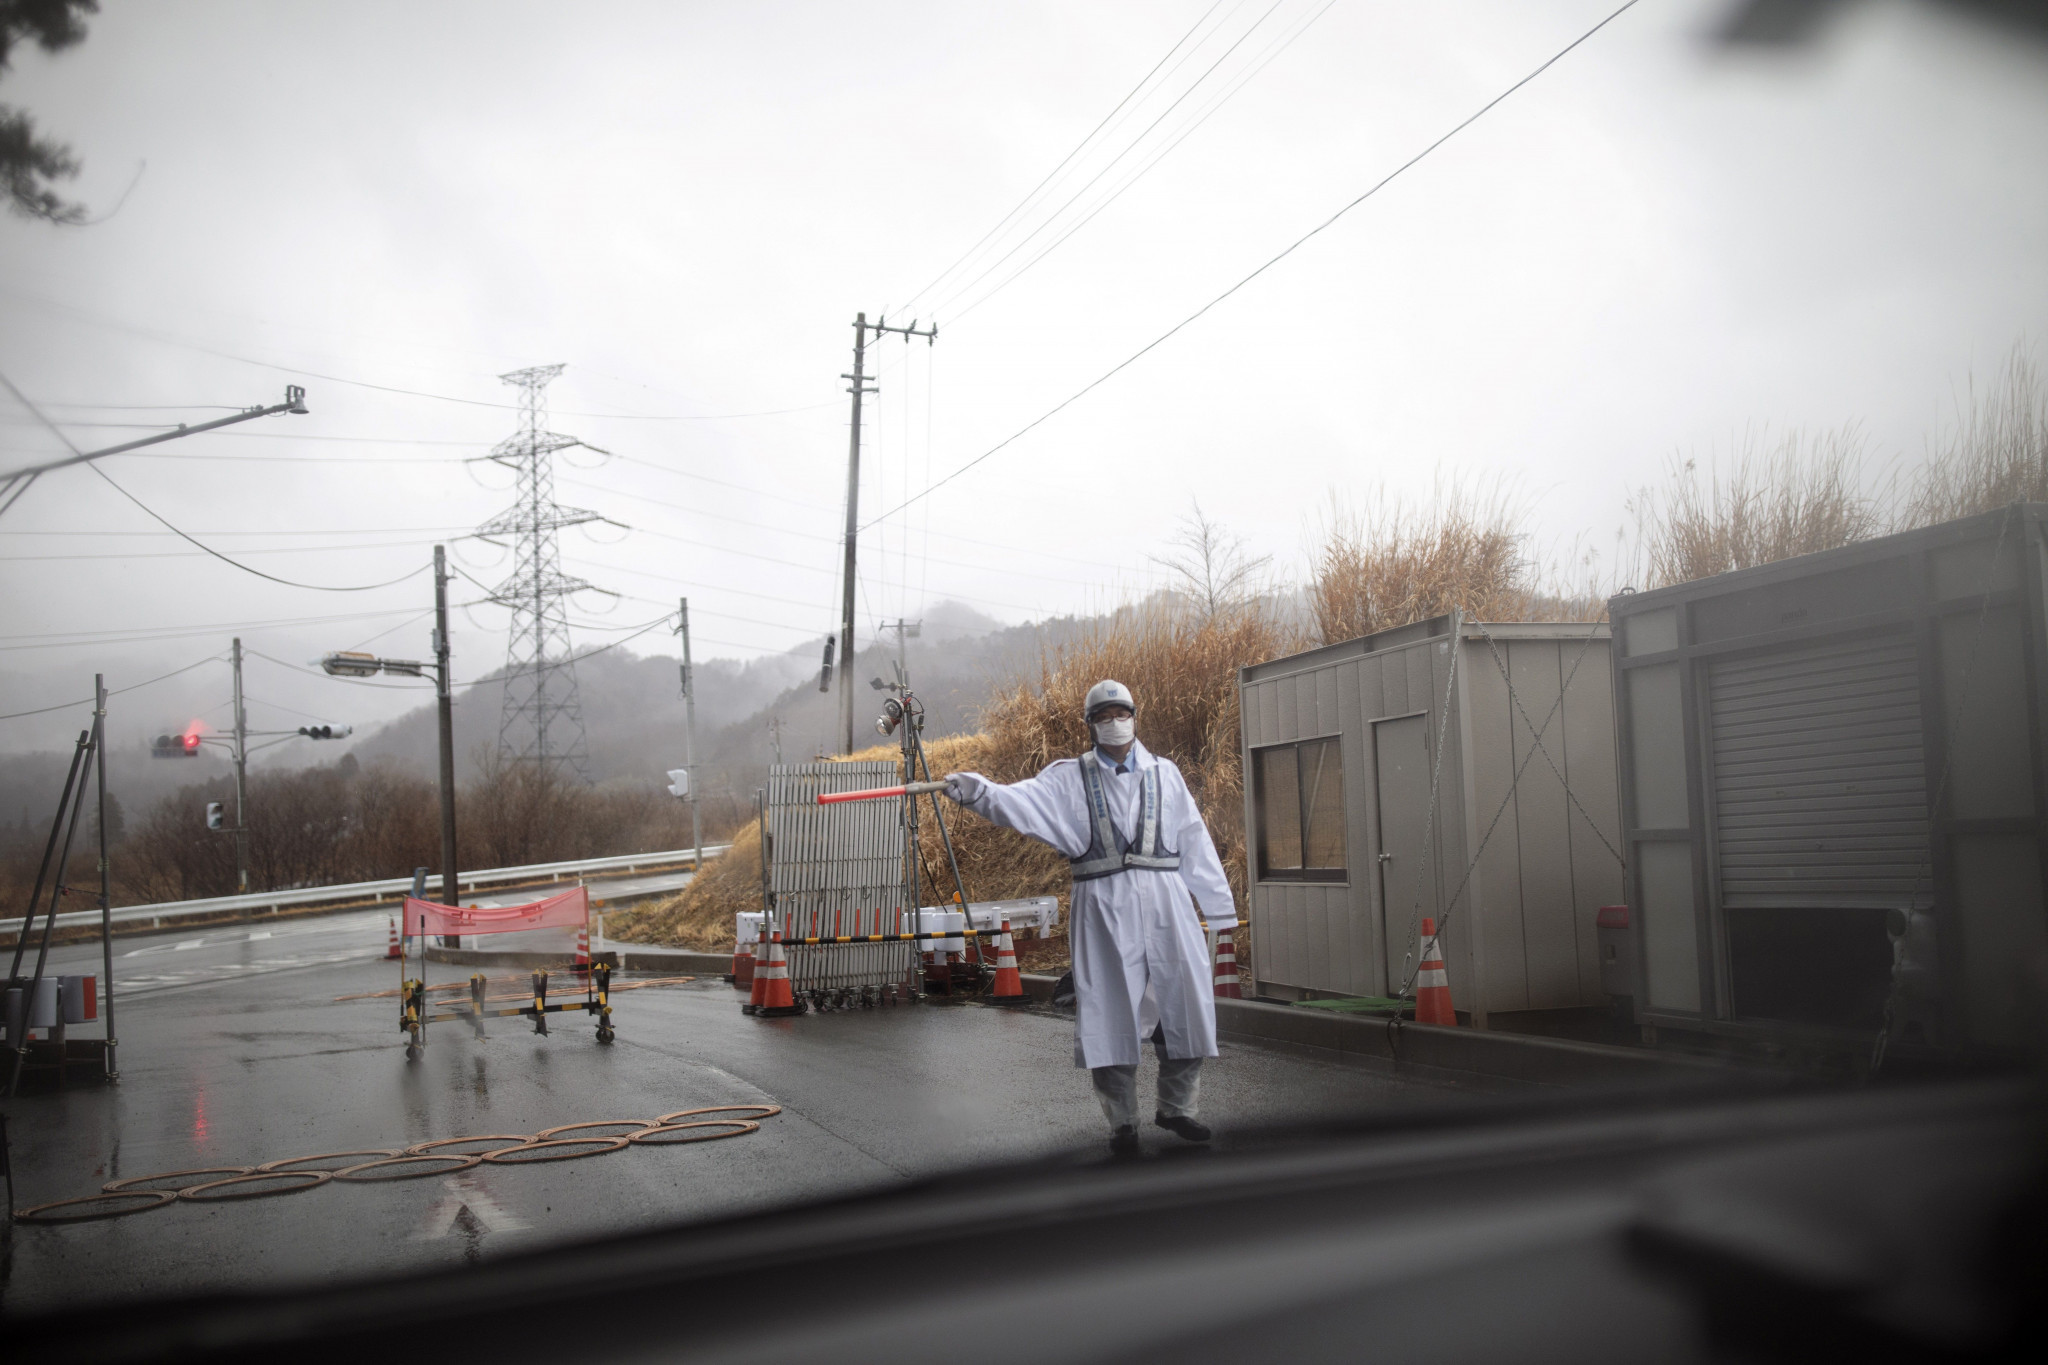 Tokyo 2020's Olympic Torch Relay will start from the disaster-hit prefecture of Fukushima on March 26 ©Getty Images